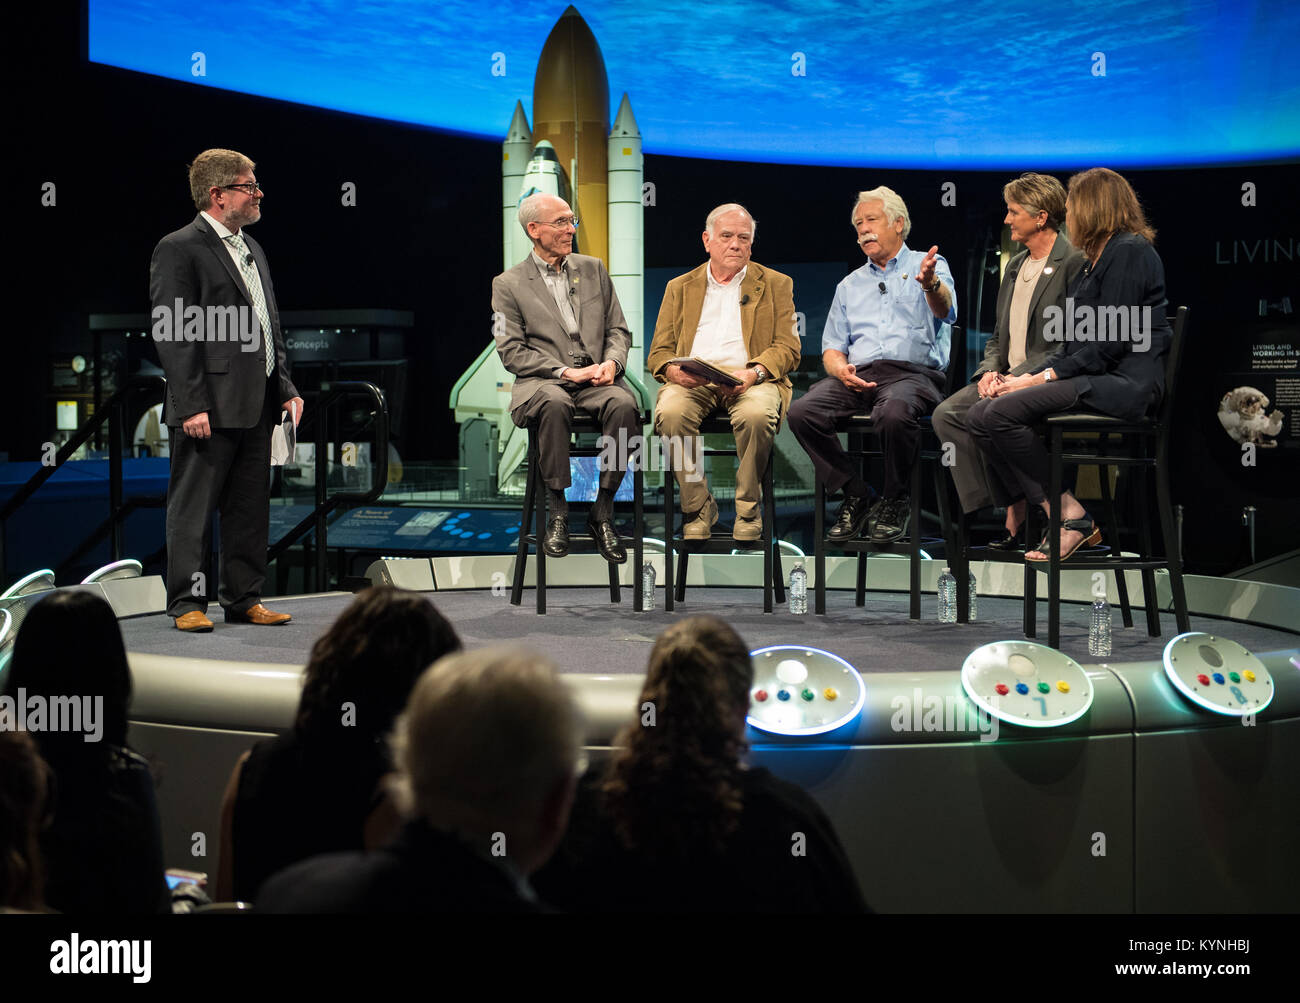 Matthew Shindell, curator, Smithsonian National Air and Space Museum (NASM), far left, moderates a panel including, from left to right, Ed Stone, Voyager project scientist; Gary Flandro, Voyager mission grand tour creator; Alan Cummings, Voyager researcher; Suzy Dodd, Voyager project manager, NASA's Jet Propulsion Laboratory; and Ann Druyan, writer/producer, Golden Record Visionary during a celebration of the 40th Anniversary of the launch of the Voyager 1 and 2 missions, Tuesday, September 5, 2017 at NASM in Washington. Voyager 1 was launched September 5, 1977, with a mission to study Jupiter Stock Photo